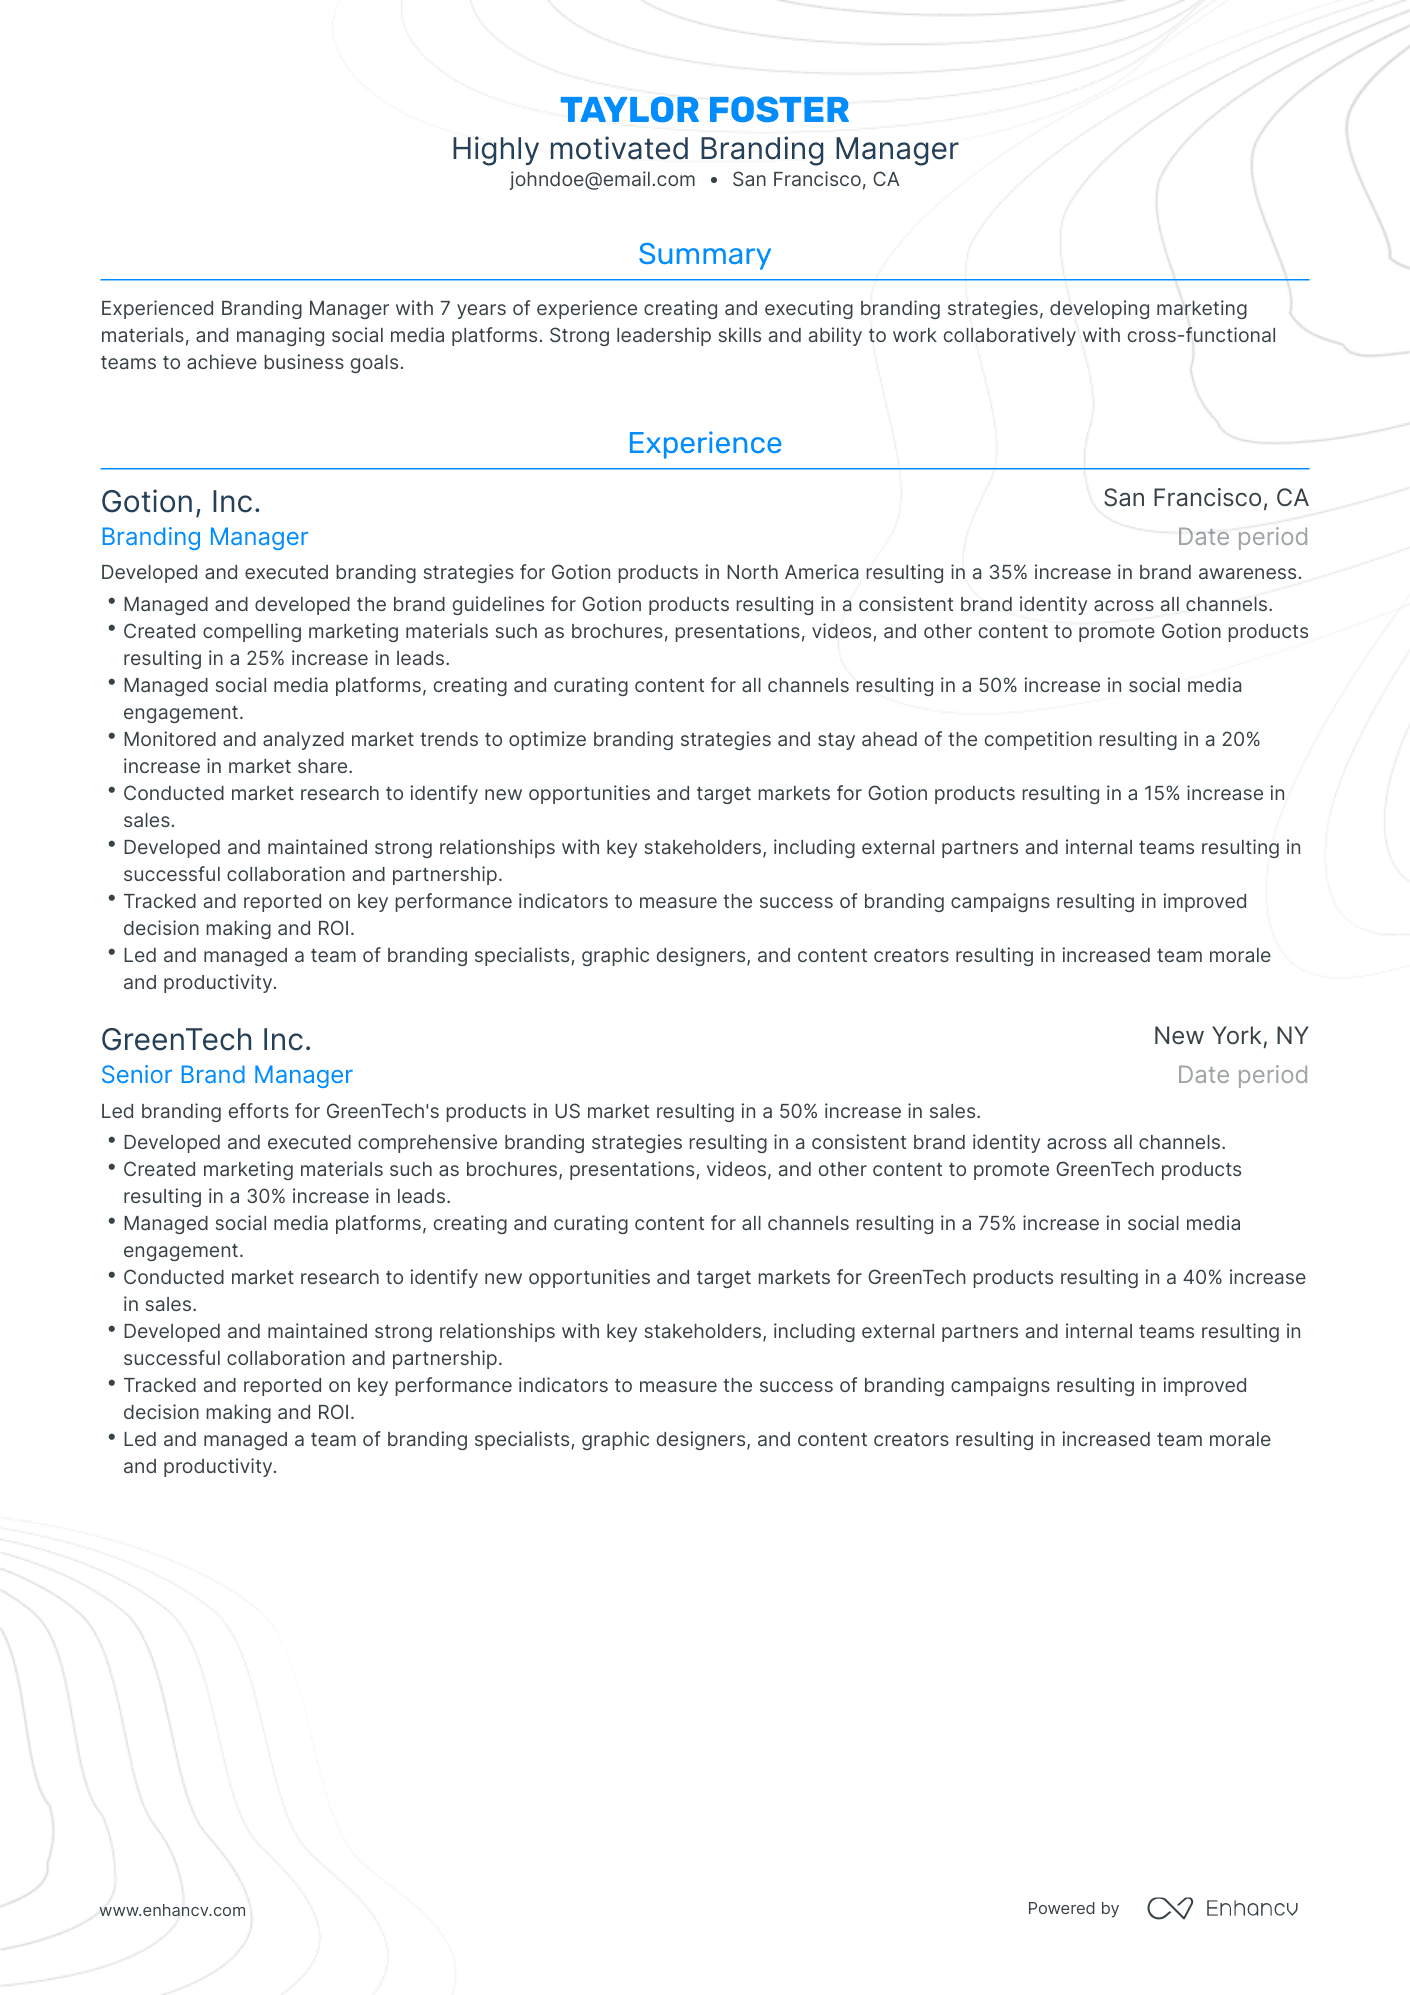 Traditional Branding Manager Resume Template